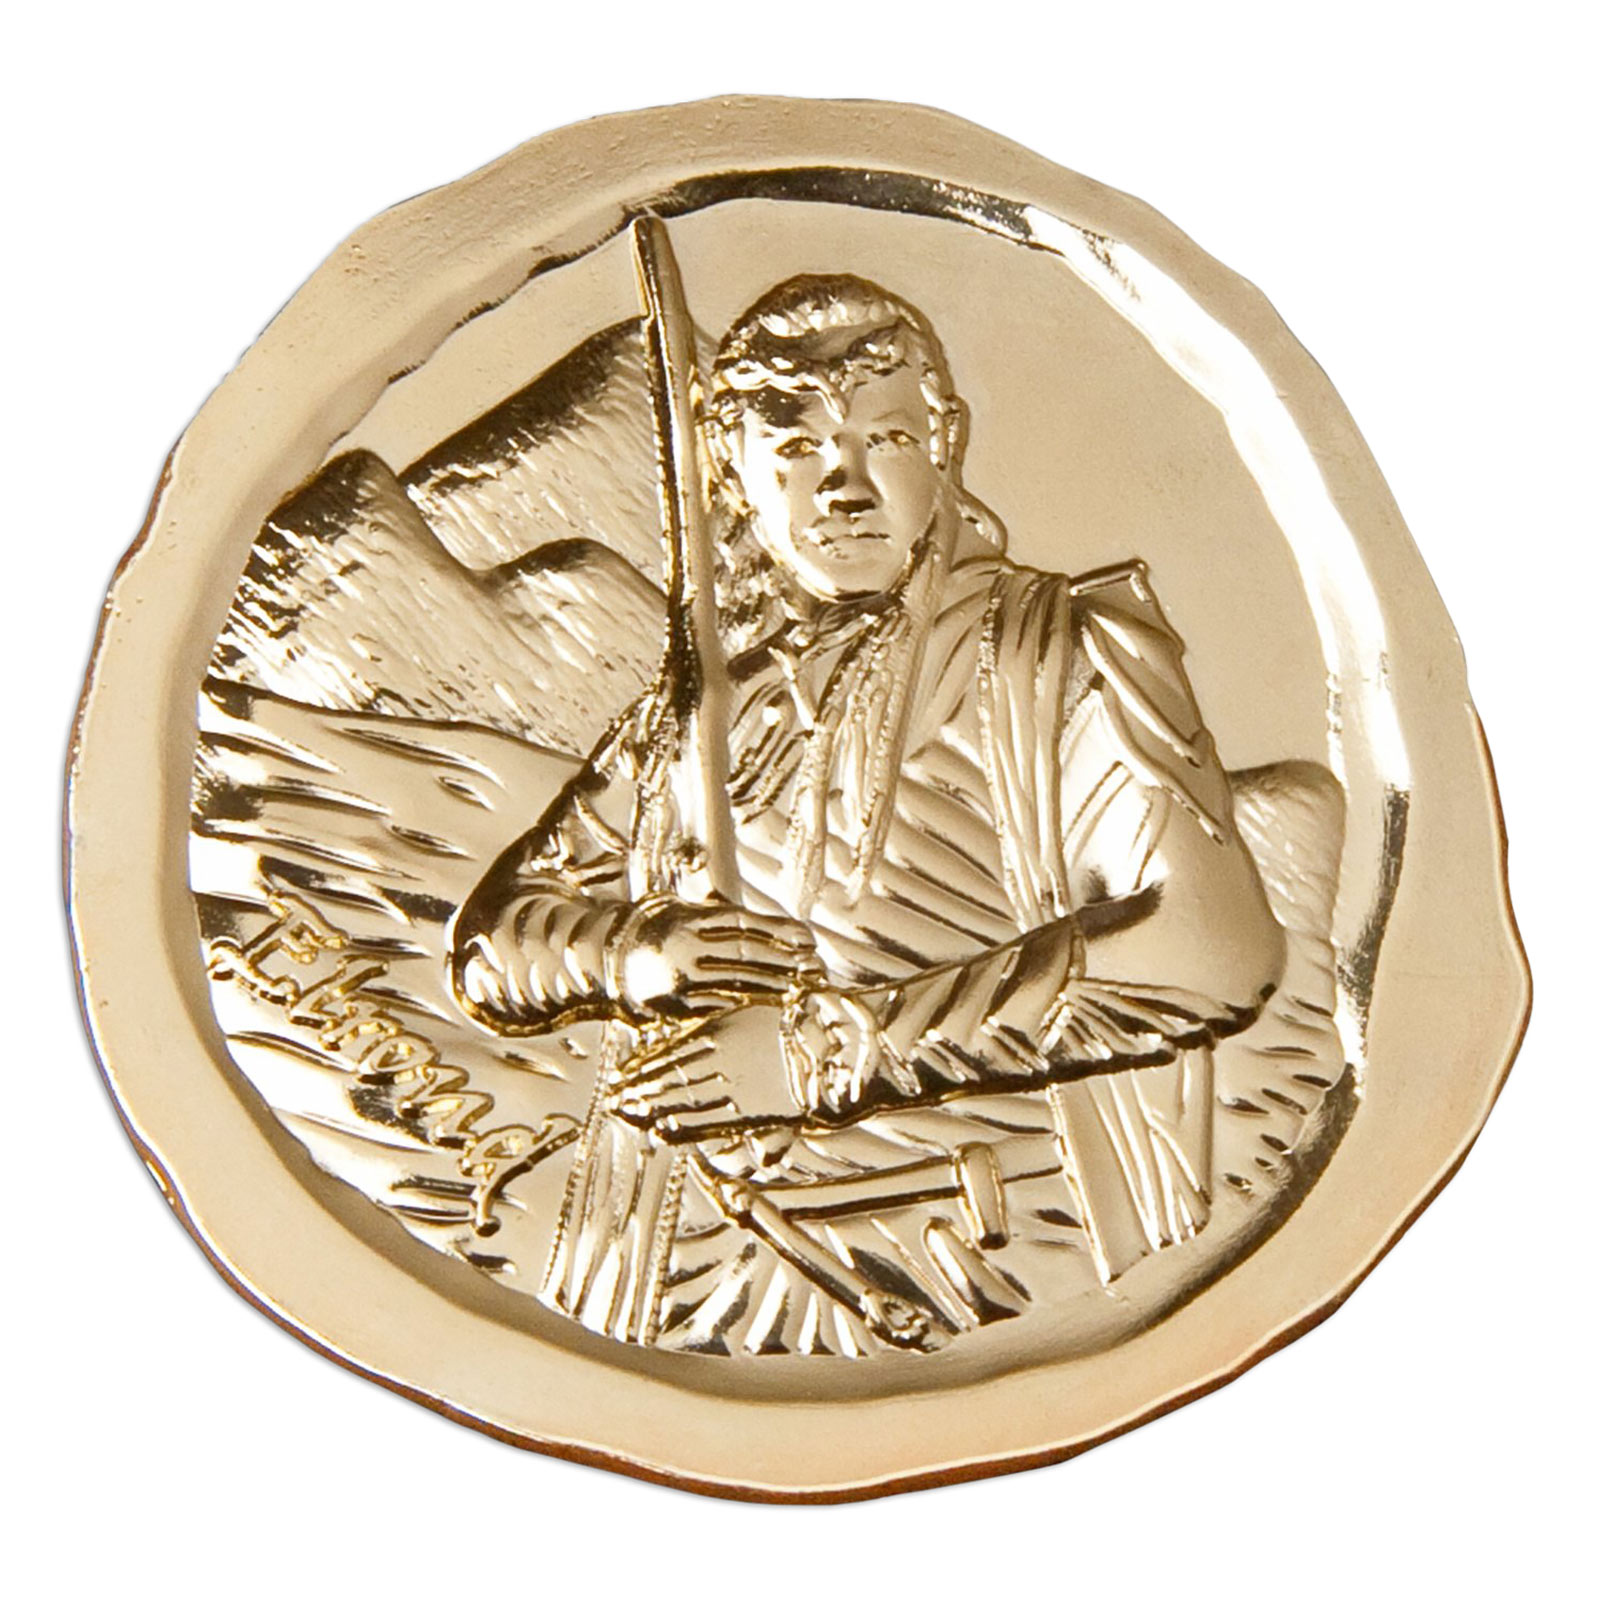 The Hobbit - Elrond Collectible Coin